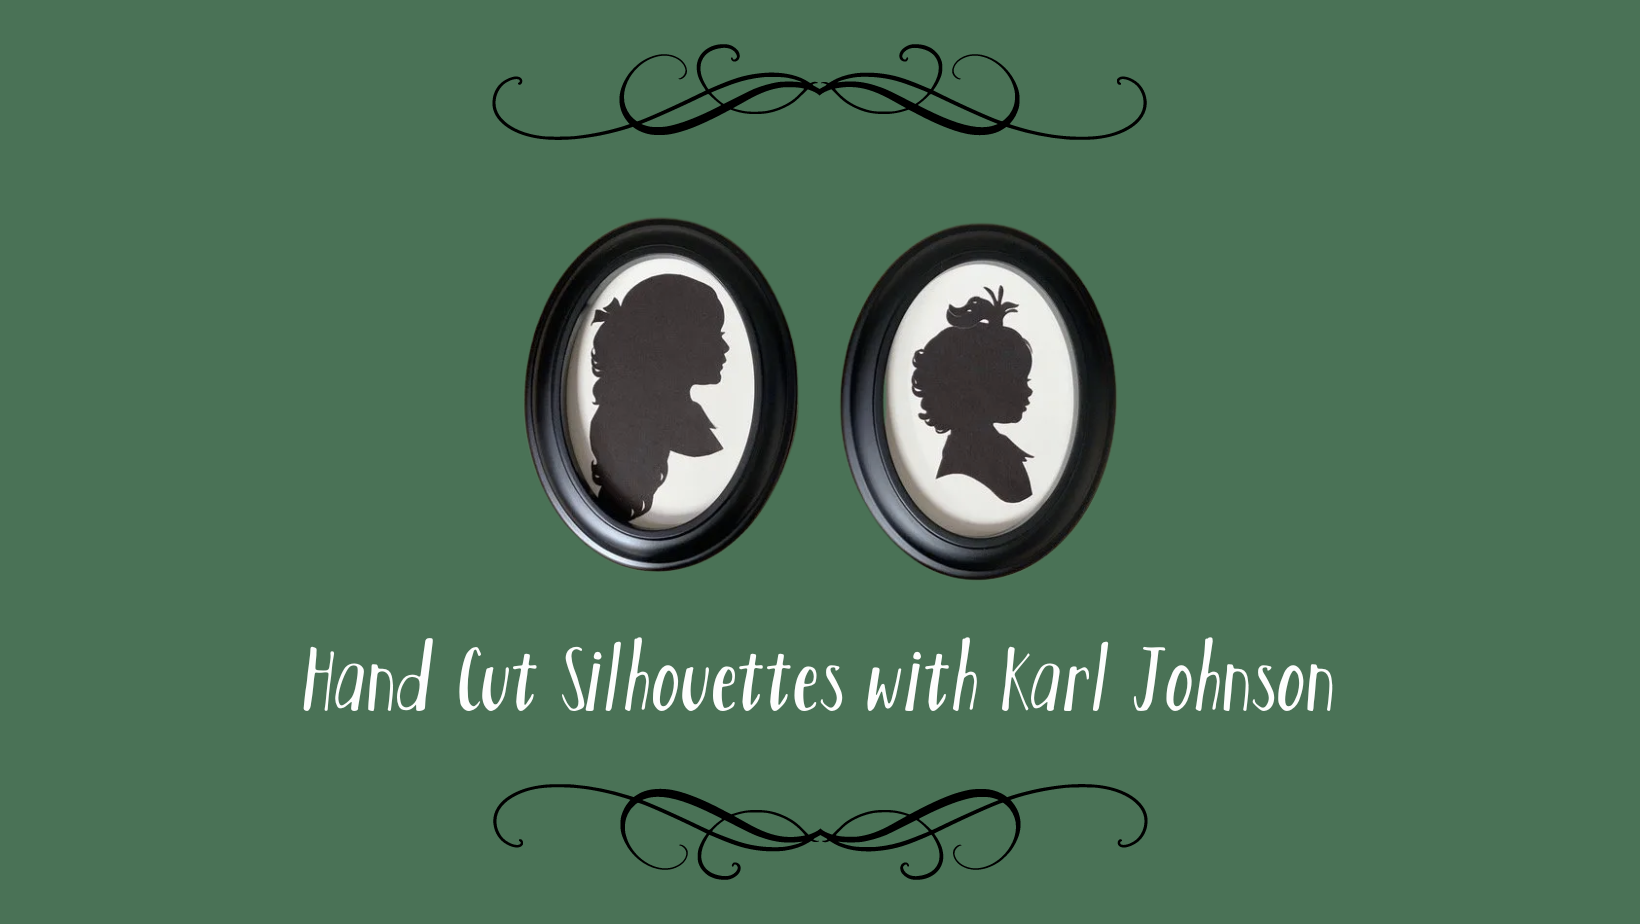 Hand Cut Silhouettes with Karl Johnson. Two silhouette portraits hang in oval frames against a dark green background.